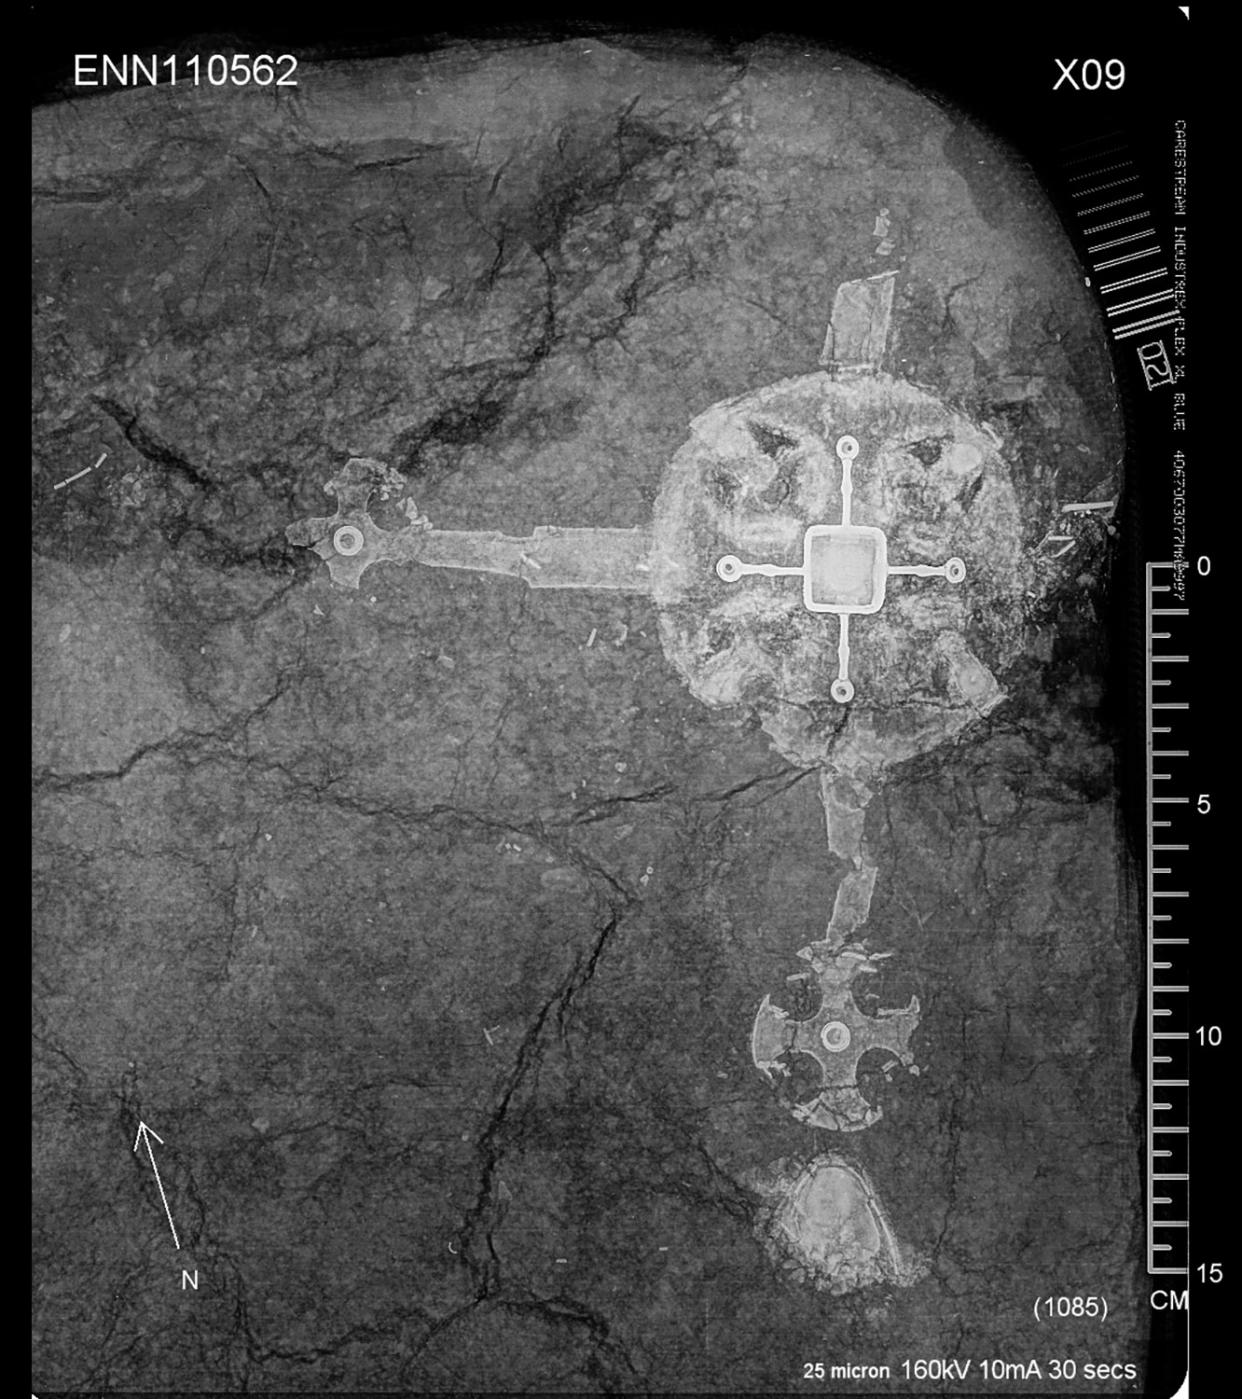 An X-ray of the cross buried in the grave (MOLA/PA)